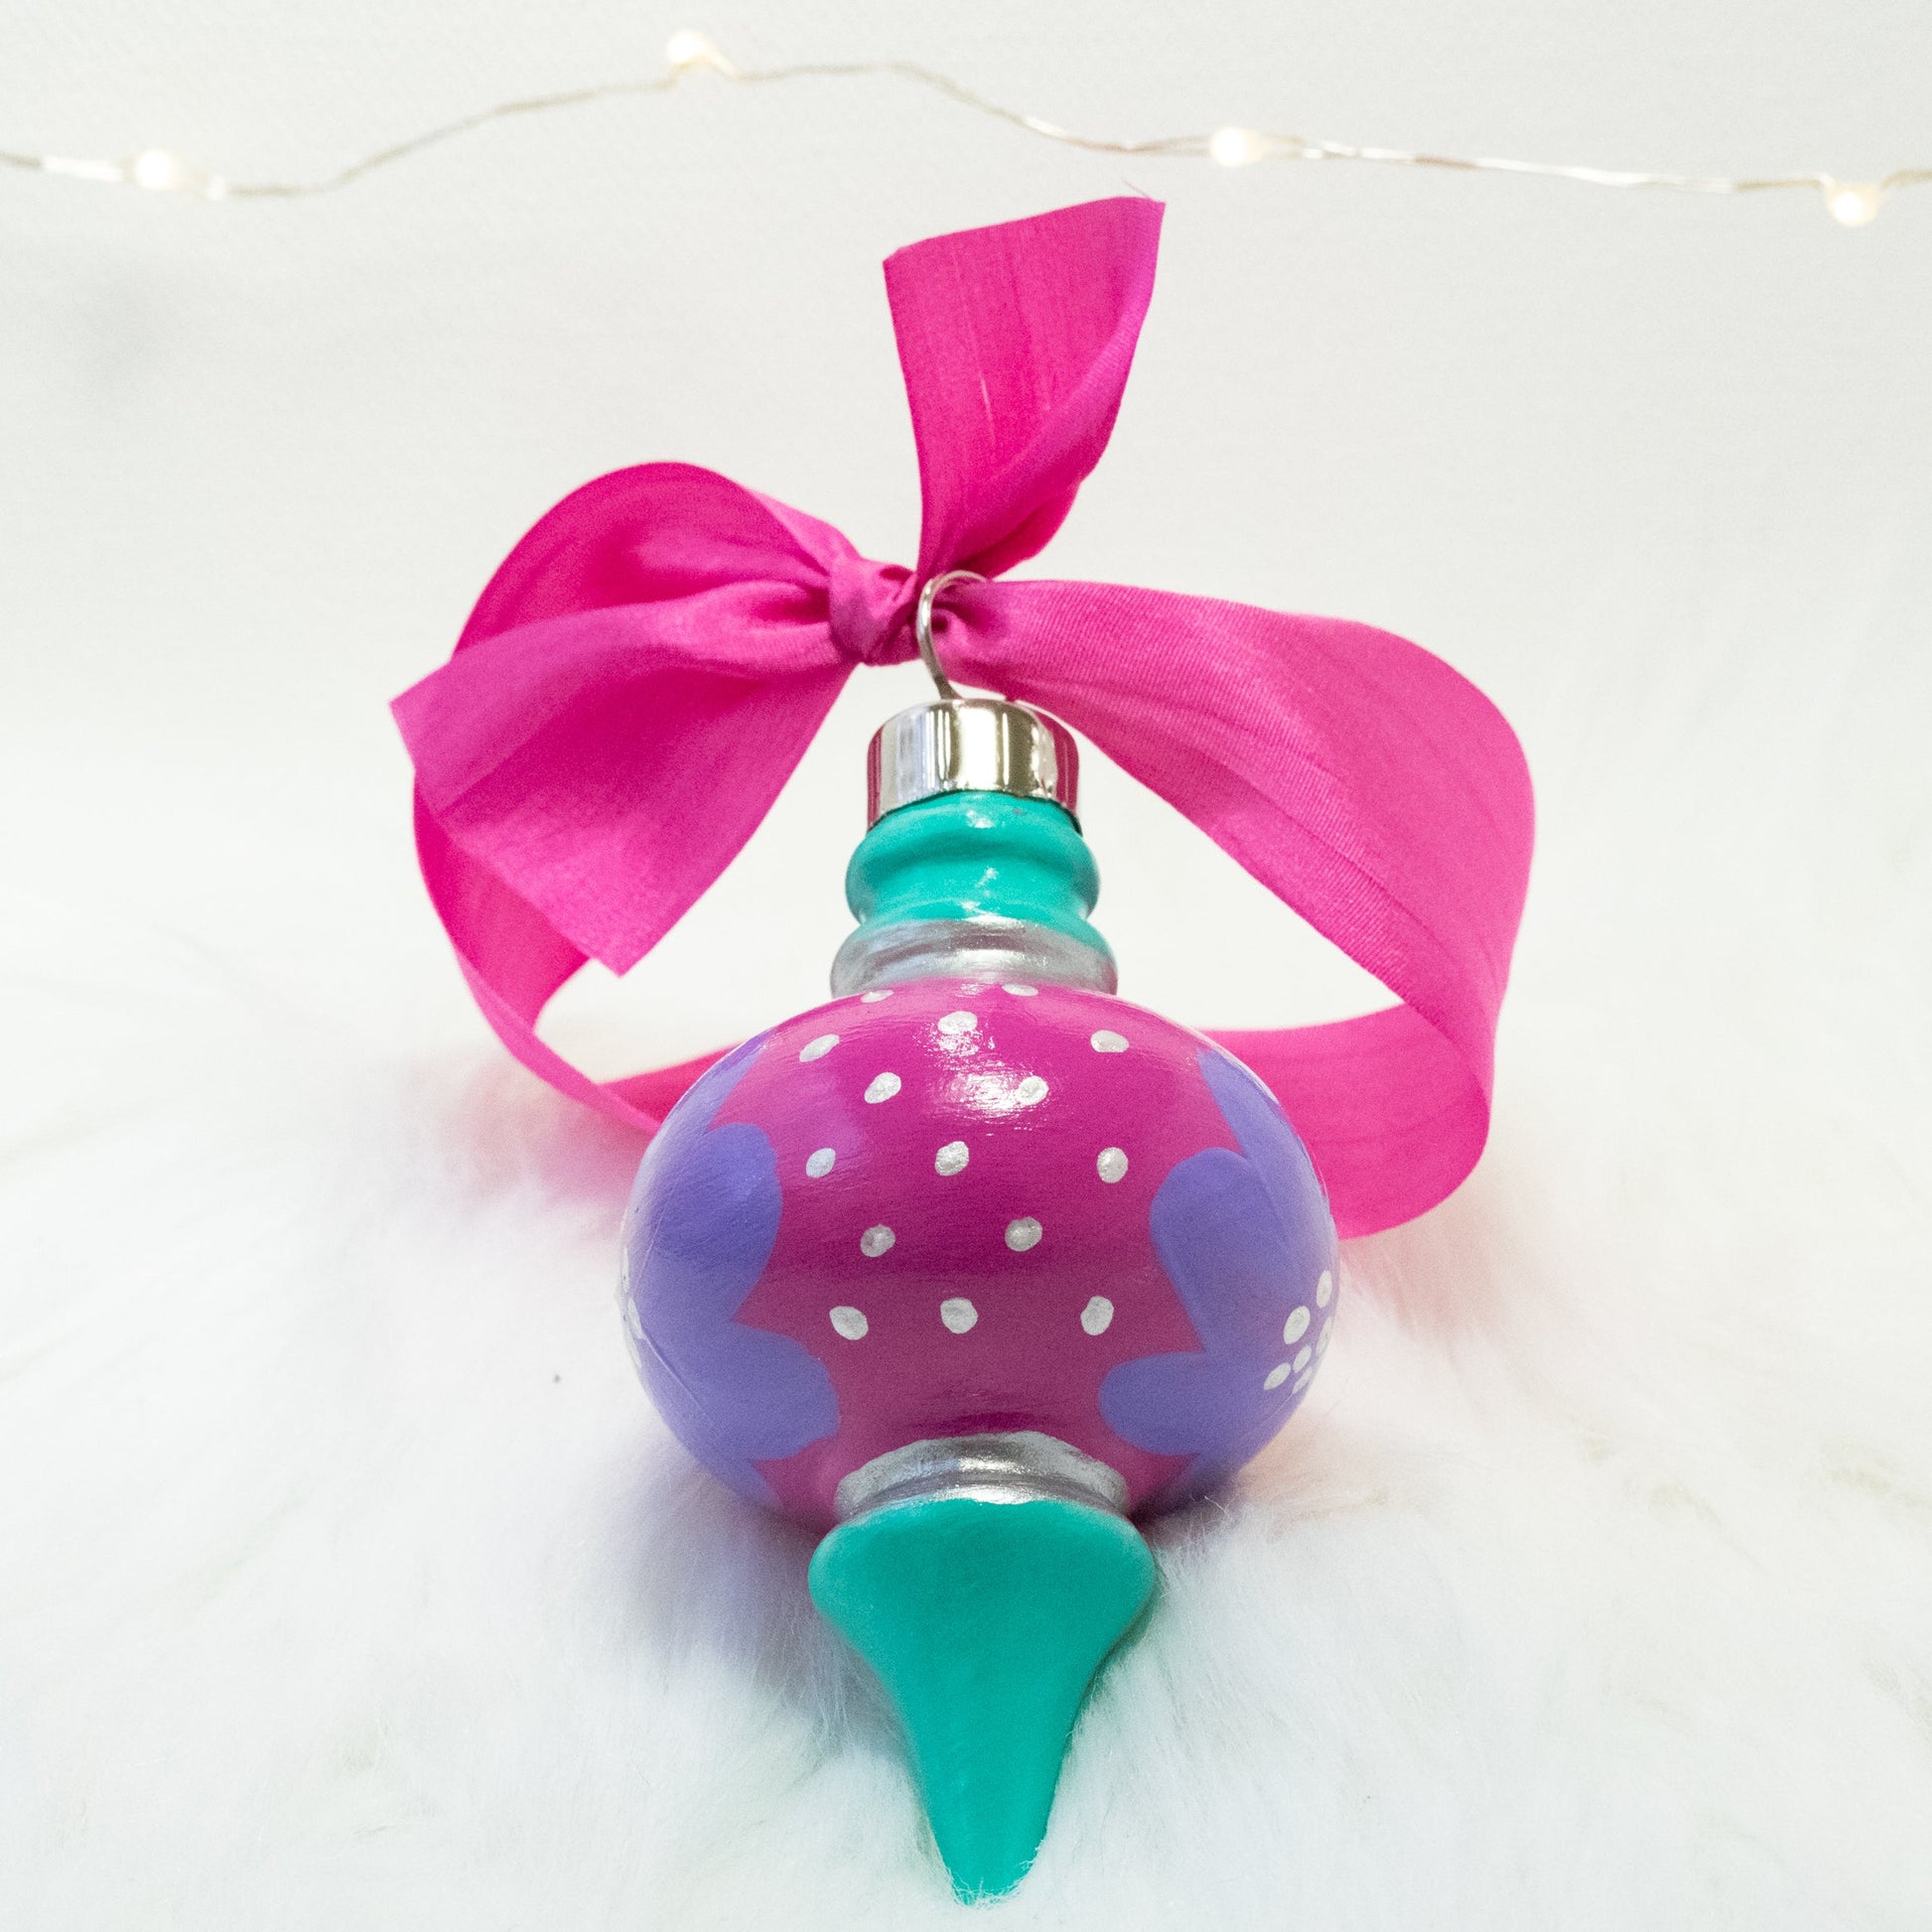 The Maxie Hand Painted Ornament features a fuchsia and bright aqua green base coat, lilac purple flowers with silver accents. Painted using fluid acrylic and acryla gouache paints. Displayed on white faux fur with fairy lights in the background.